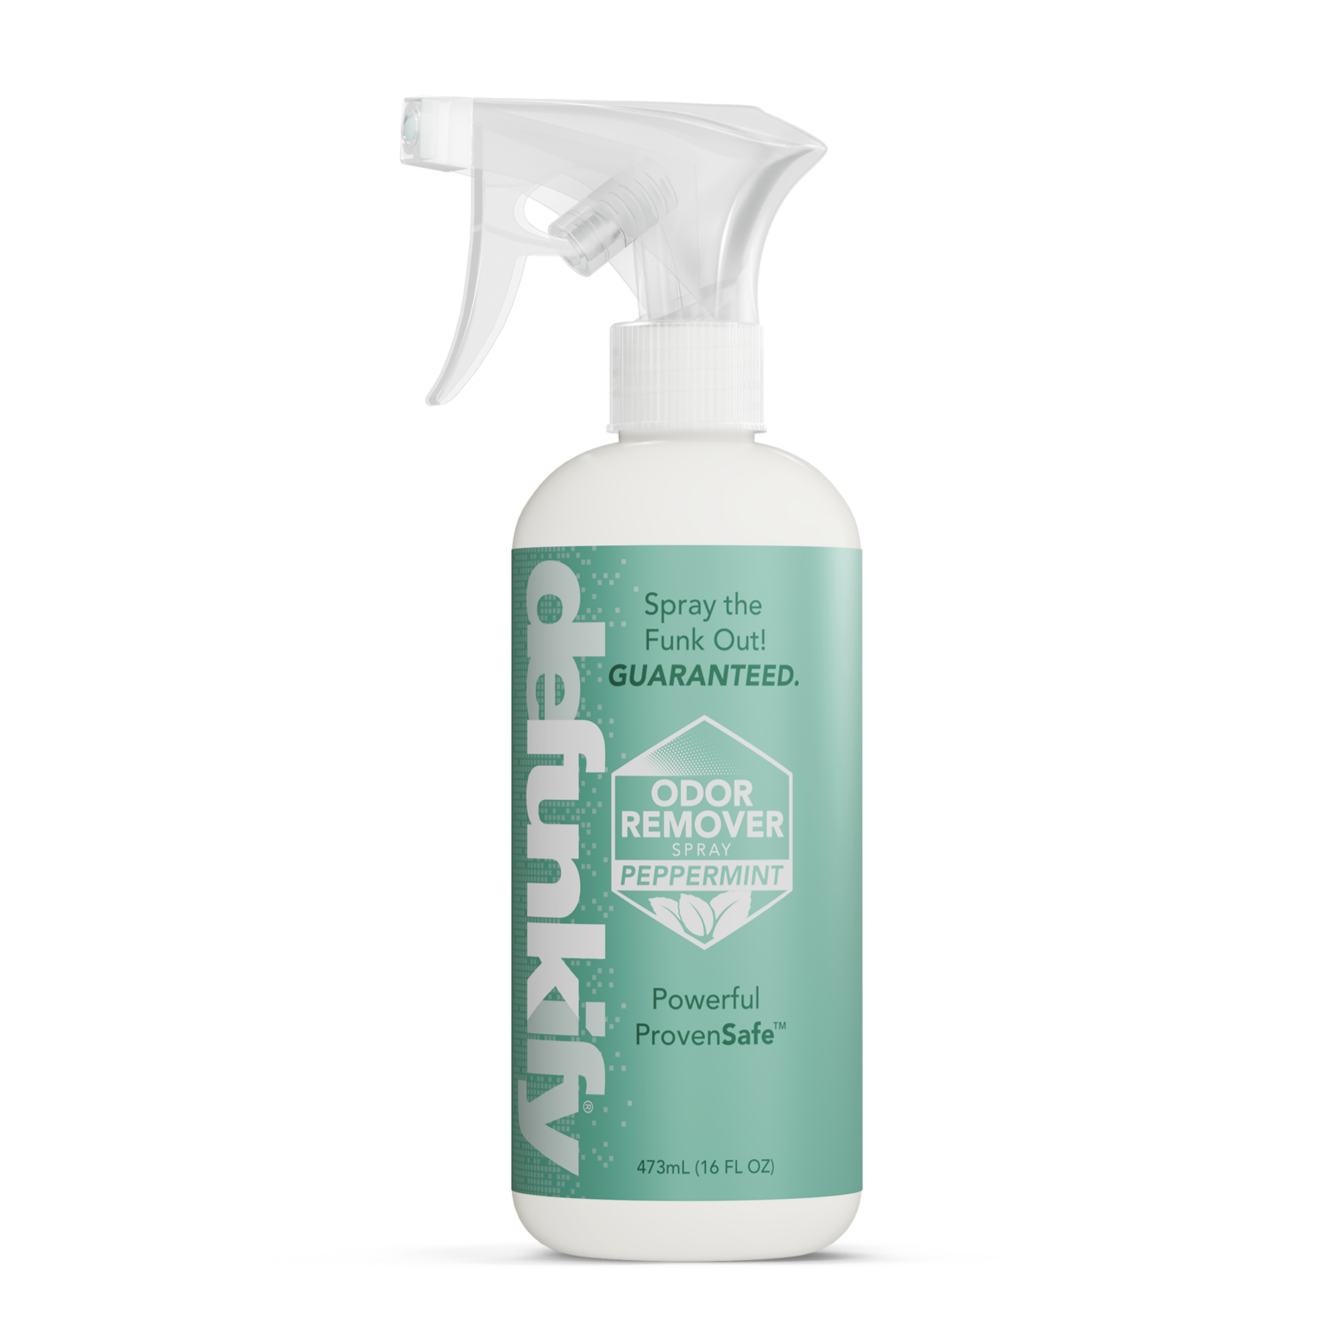 Defunkify Odor Remover Spray - Peppermint Scent